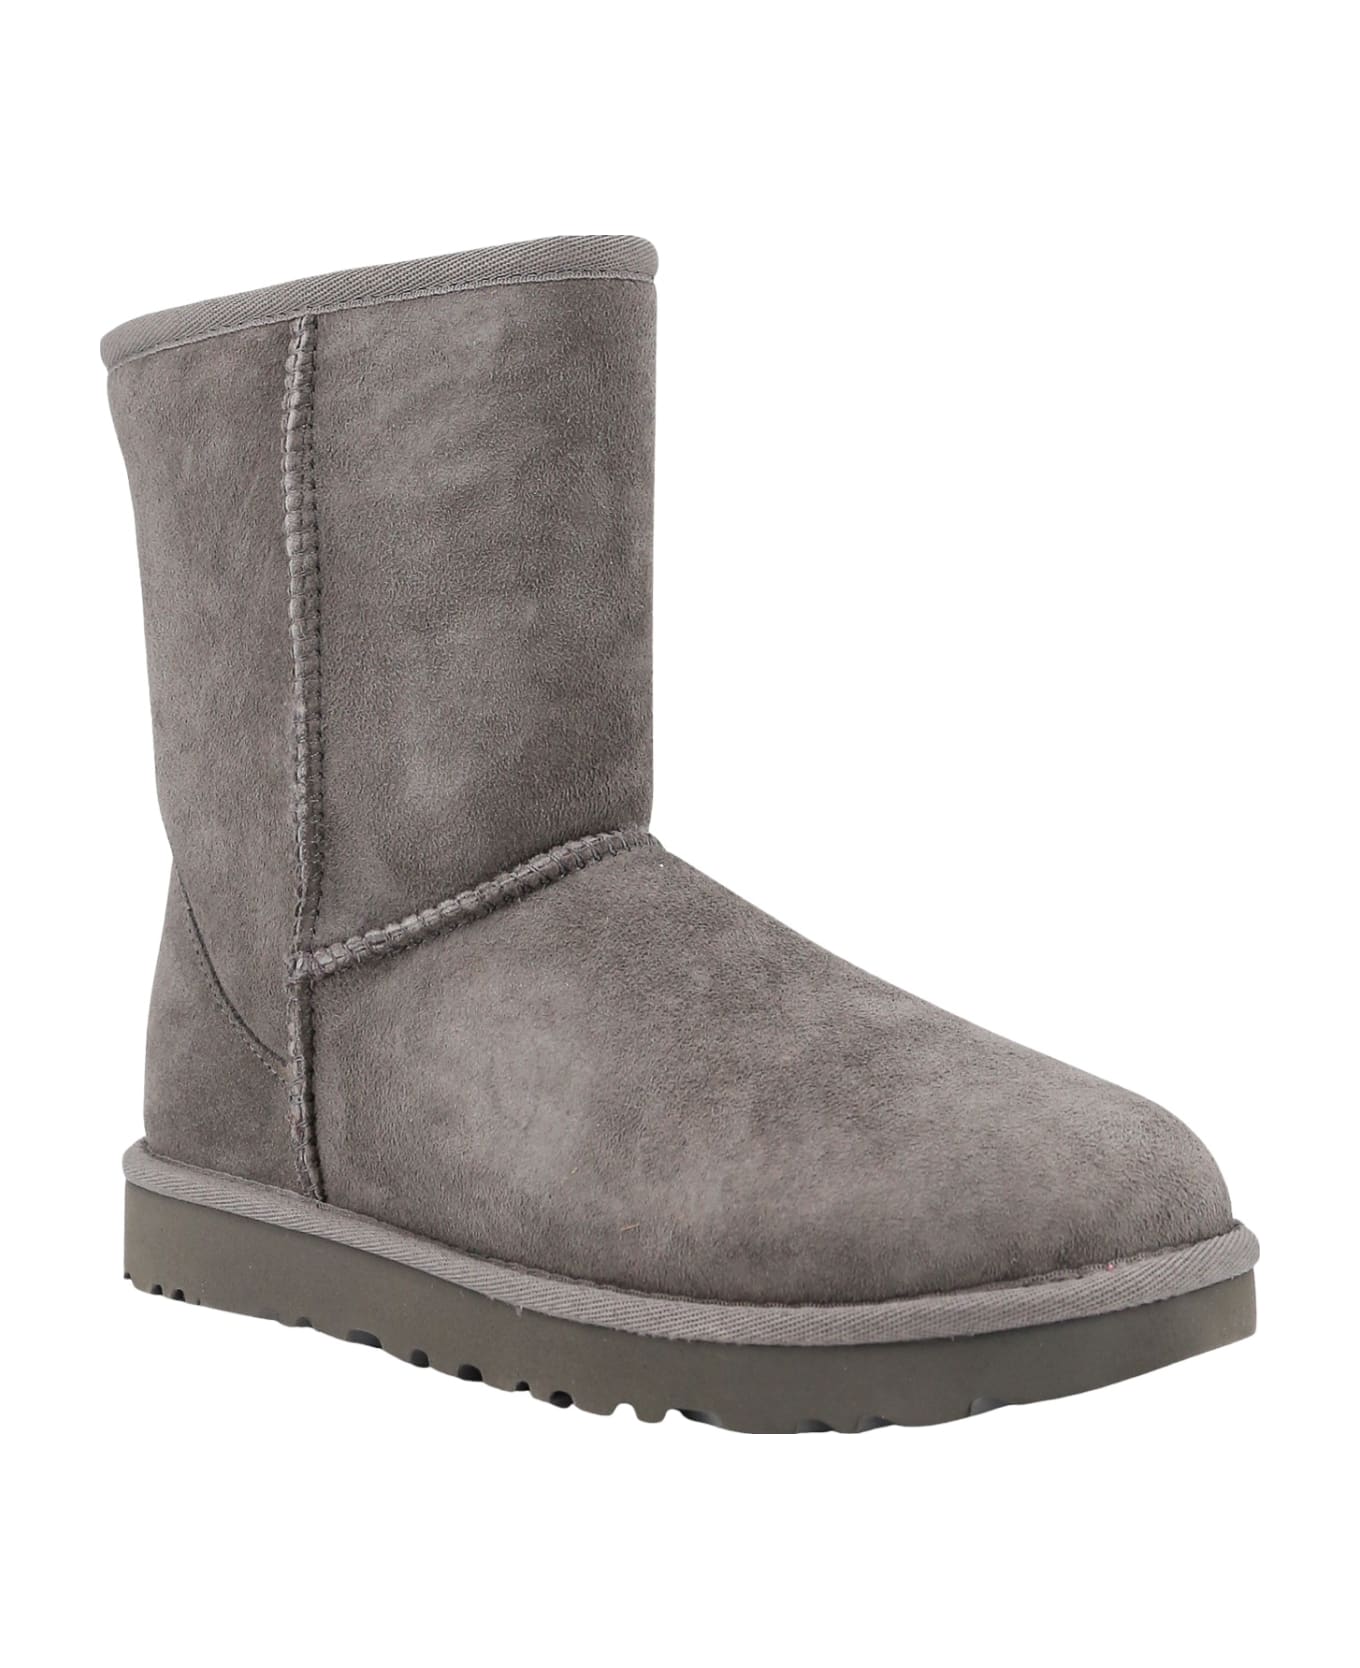 UGG Classic Short Ankle Boots - Grey